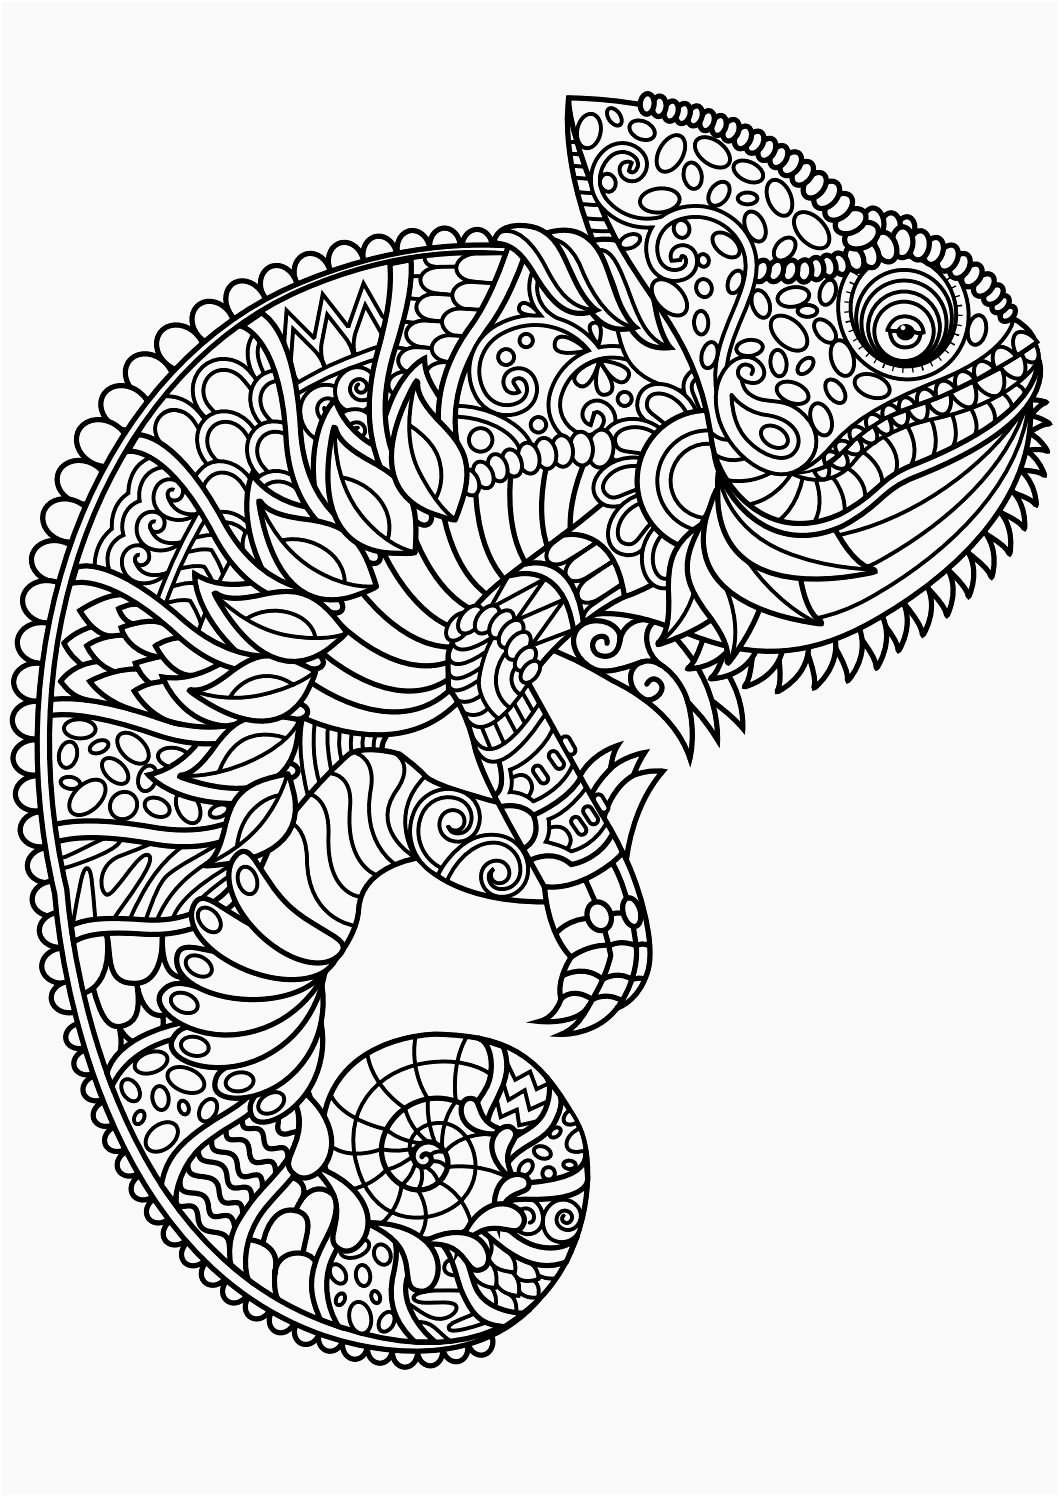 Free Printable Poodle Template - Dachsund Coloring Pages Poodle - Free Printable Poodle Template